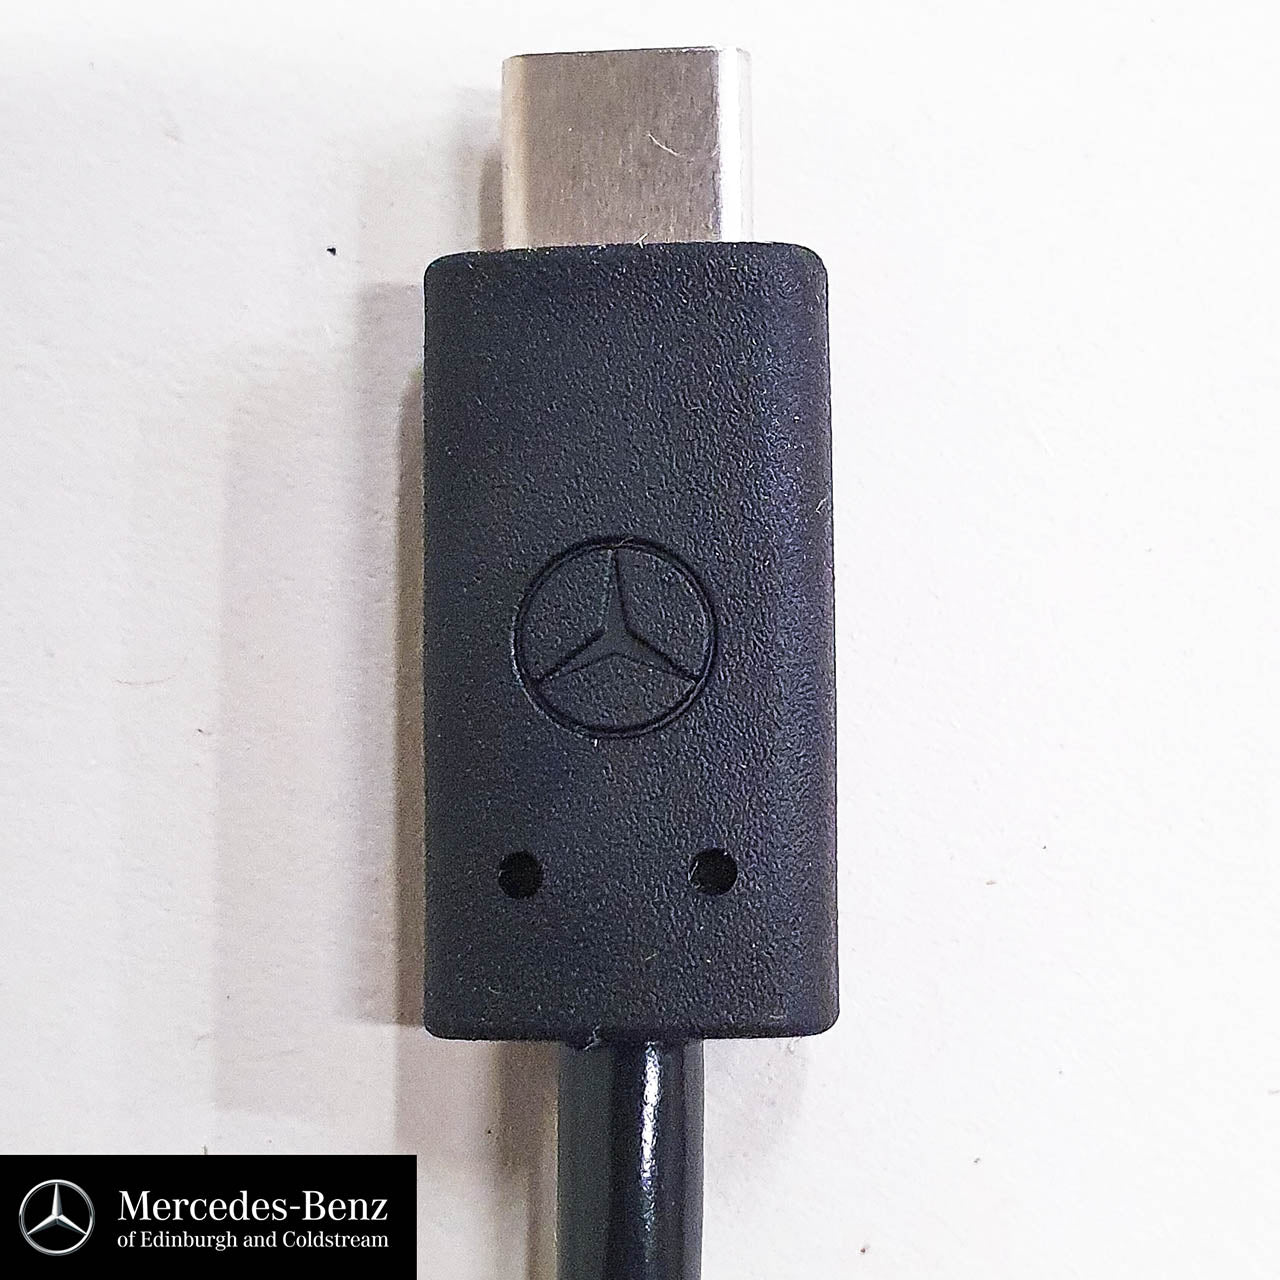 Genuine Mercedes-Benz Media Interface adapter cable USB to USB-C